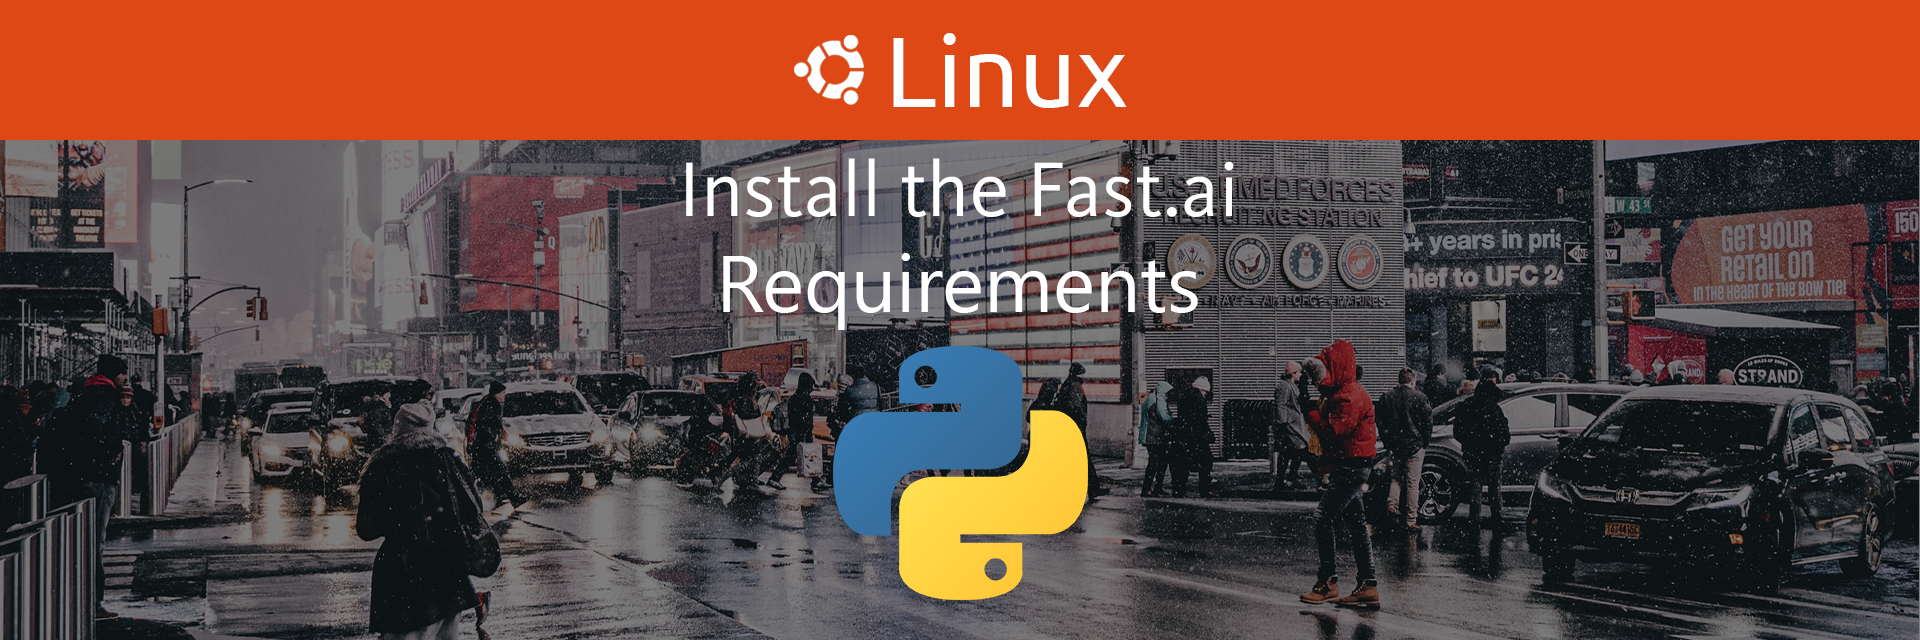 Install the Fast.ai Requirements on Linux